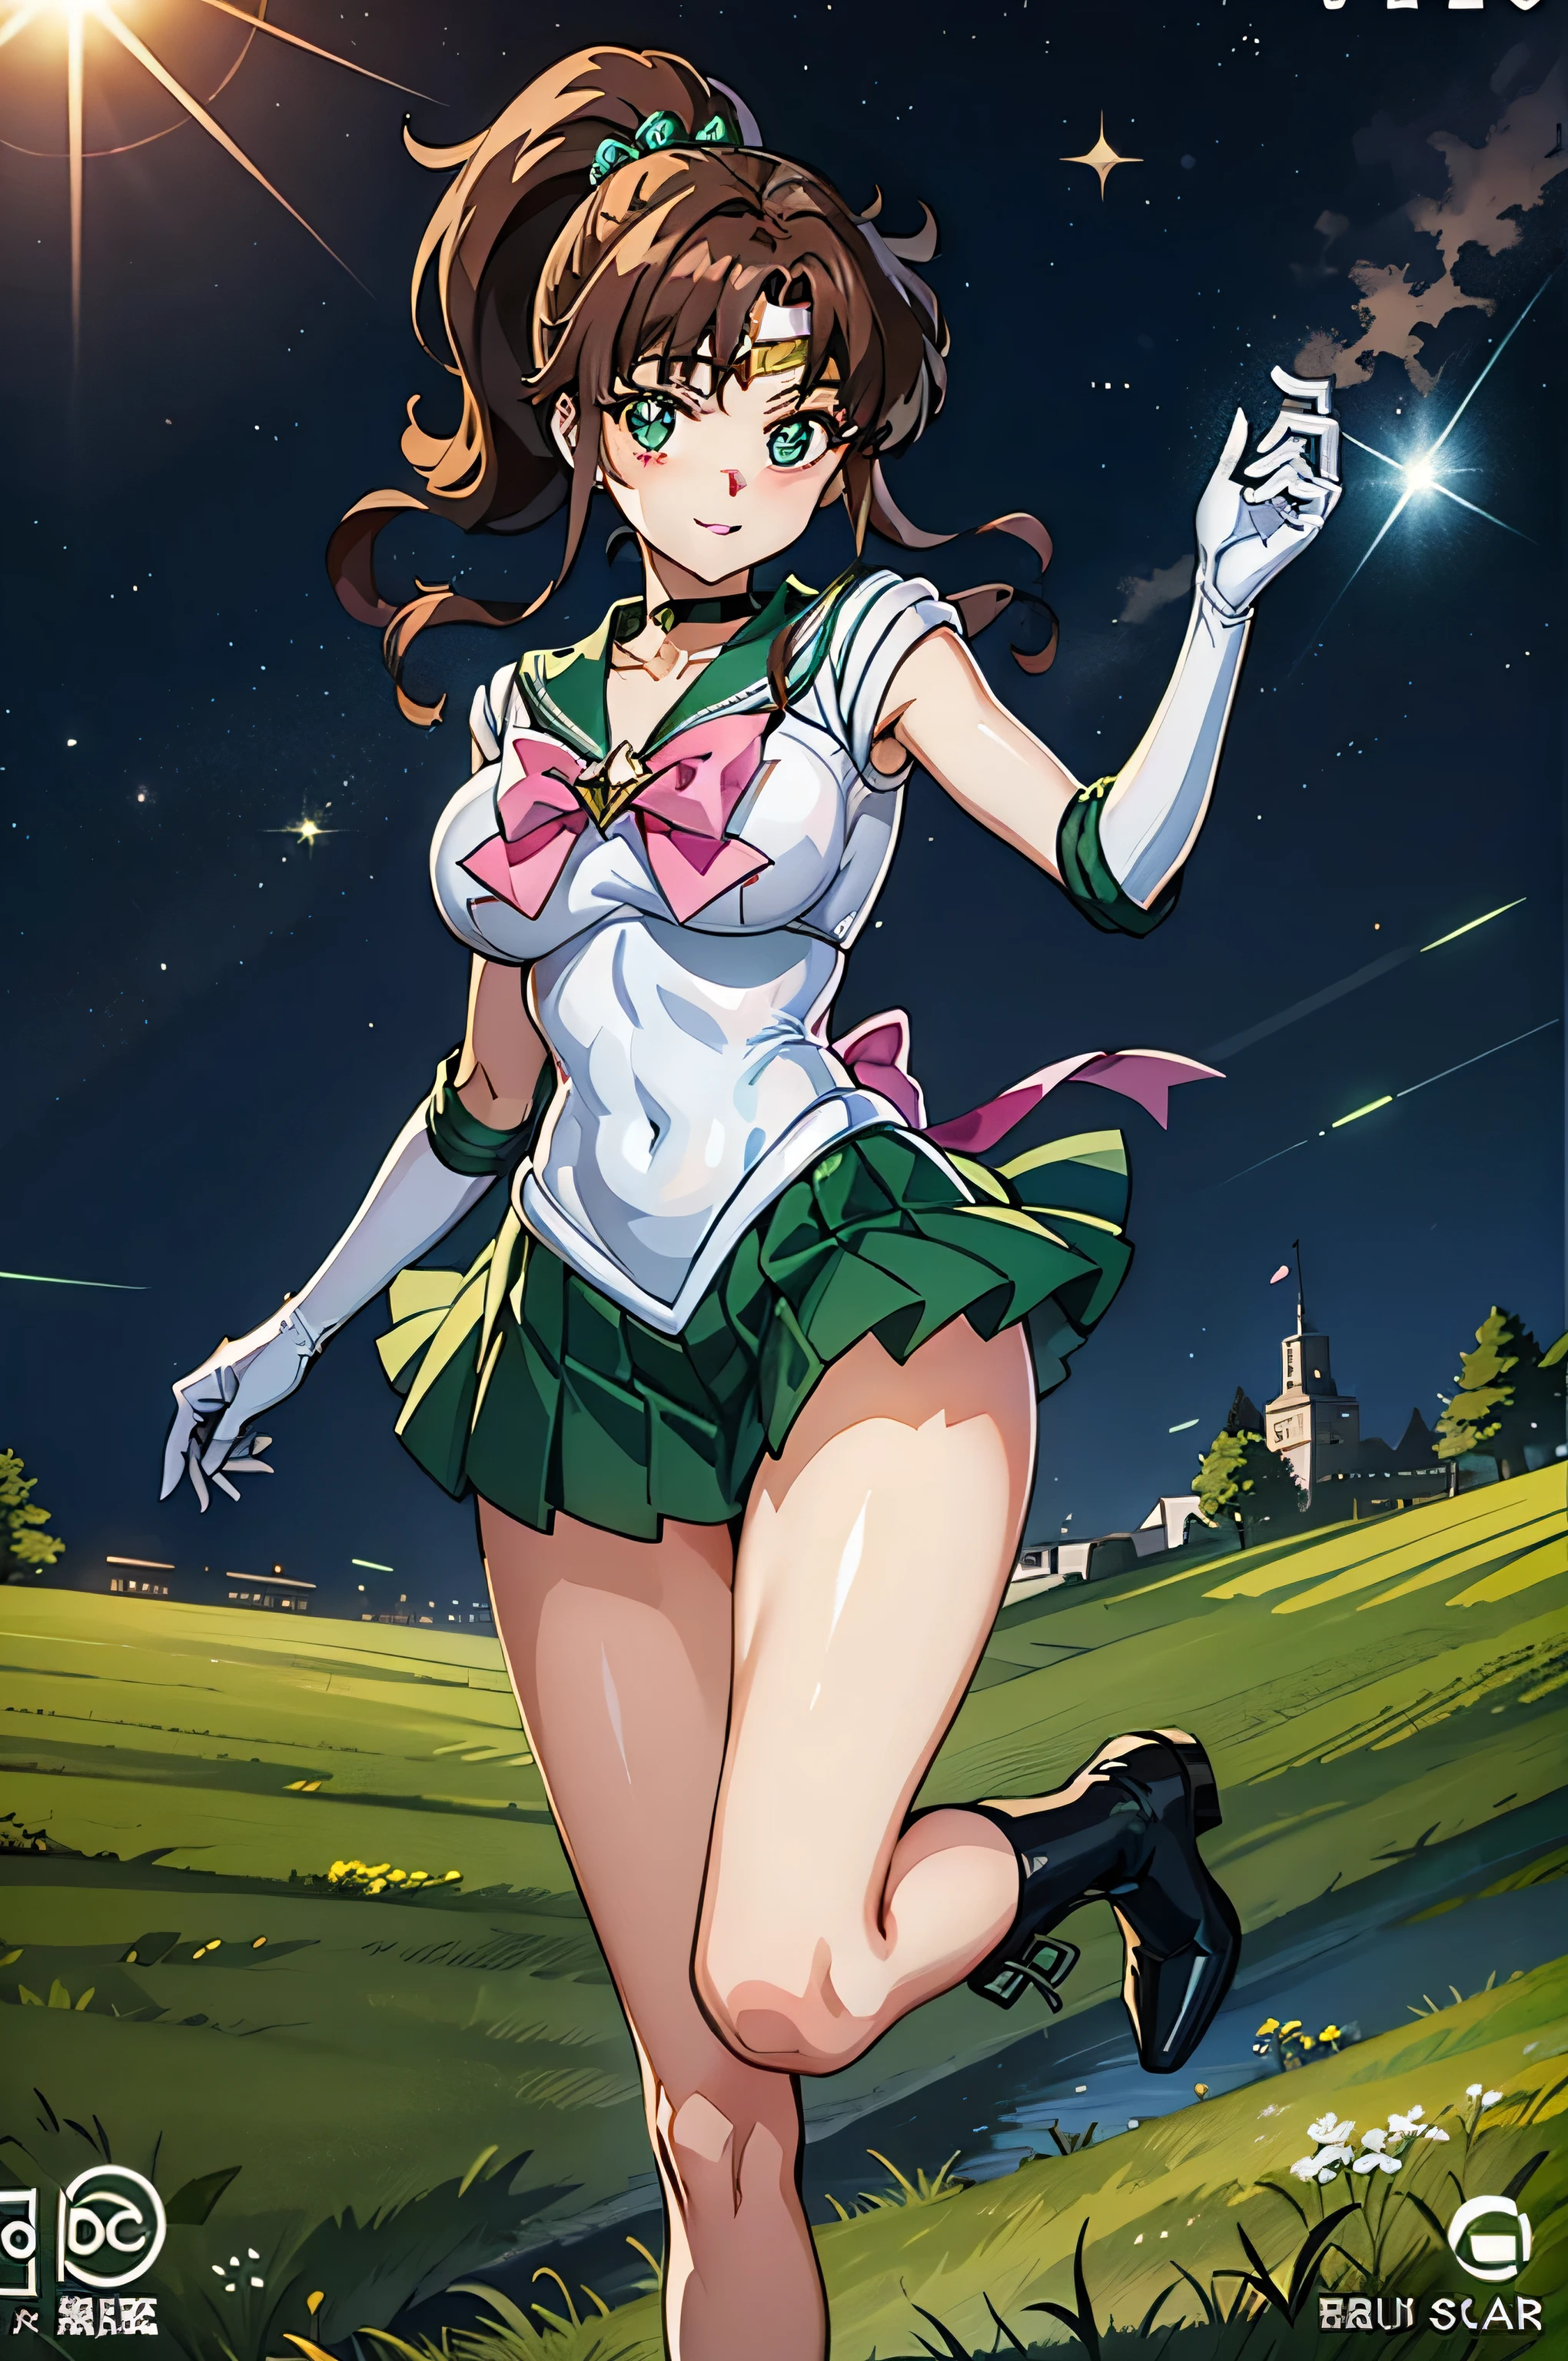 View your viewers, Have a look at this、Looking at the camera、Sailor Jupiter、Are standing、Hmph , Thigh opening、Spread your legs、Beautiful legs、Raise one leg、face exposed to light、Sparkling eyes、Vivid eyes、Clear contours、Clear contours、Clear contours、Detailed contours、blue eyes、Big eyes、Clear Eyes、Clear eyes、ponytail、Brown Hair、White leotard、White gloves、Long gloves、Pink Ribbon、Gold Tiara、Green Brooch、green sailor collar、Green mini skirt、Green pleated skirt、Green elbow pads、Green Boots、Sailor Moon、Laughter、Laughter、Proud face、Confident々face、Cute face,((Tabletop)),((highest quality)),Very detailed,Awareness-raising,Explicit,beautiful body,beautiful nose,beautiful character design,Perfect Eyes,Perfect face,wallpaper,超A high resolution,4K,photograph,(beautiful, Large Breasts:1.2),(beautiful face:1.2),(beautiful legs, Perfect Legs),Shiny skin,Official Style,One Girl,masterpiece、Best image quality、Detailed explanation、One Girl，Large Breasts、grassland、grass